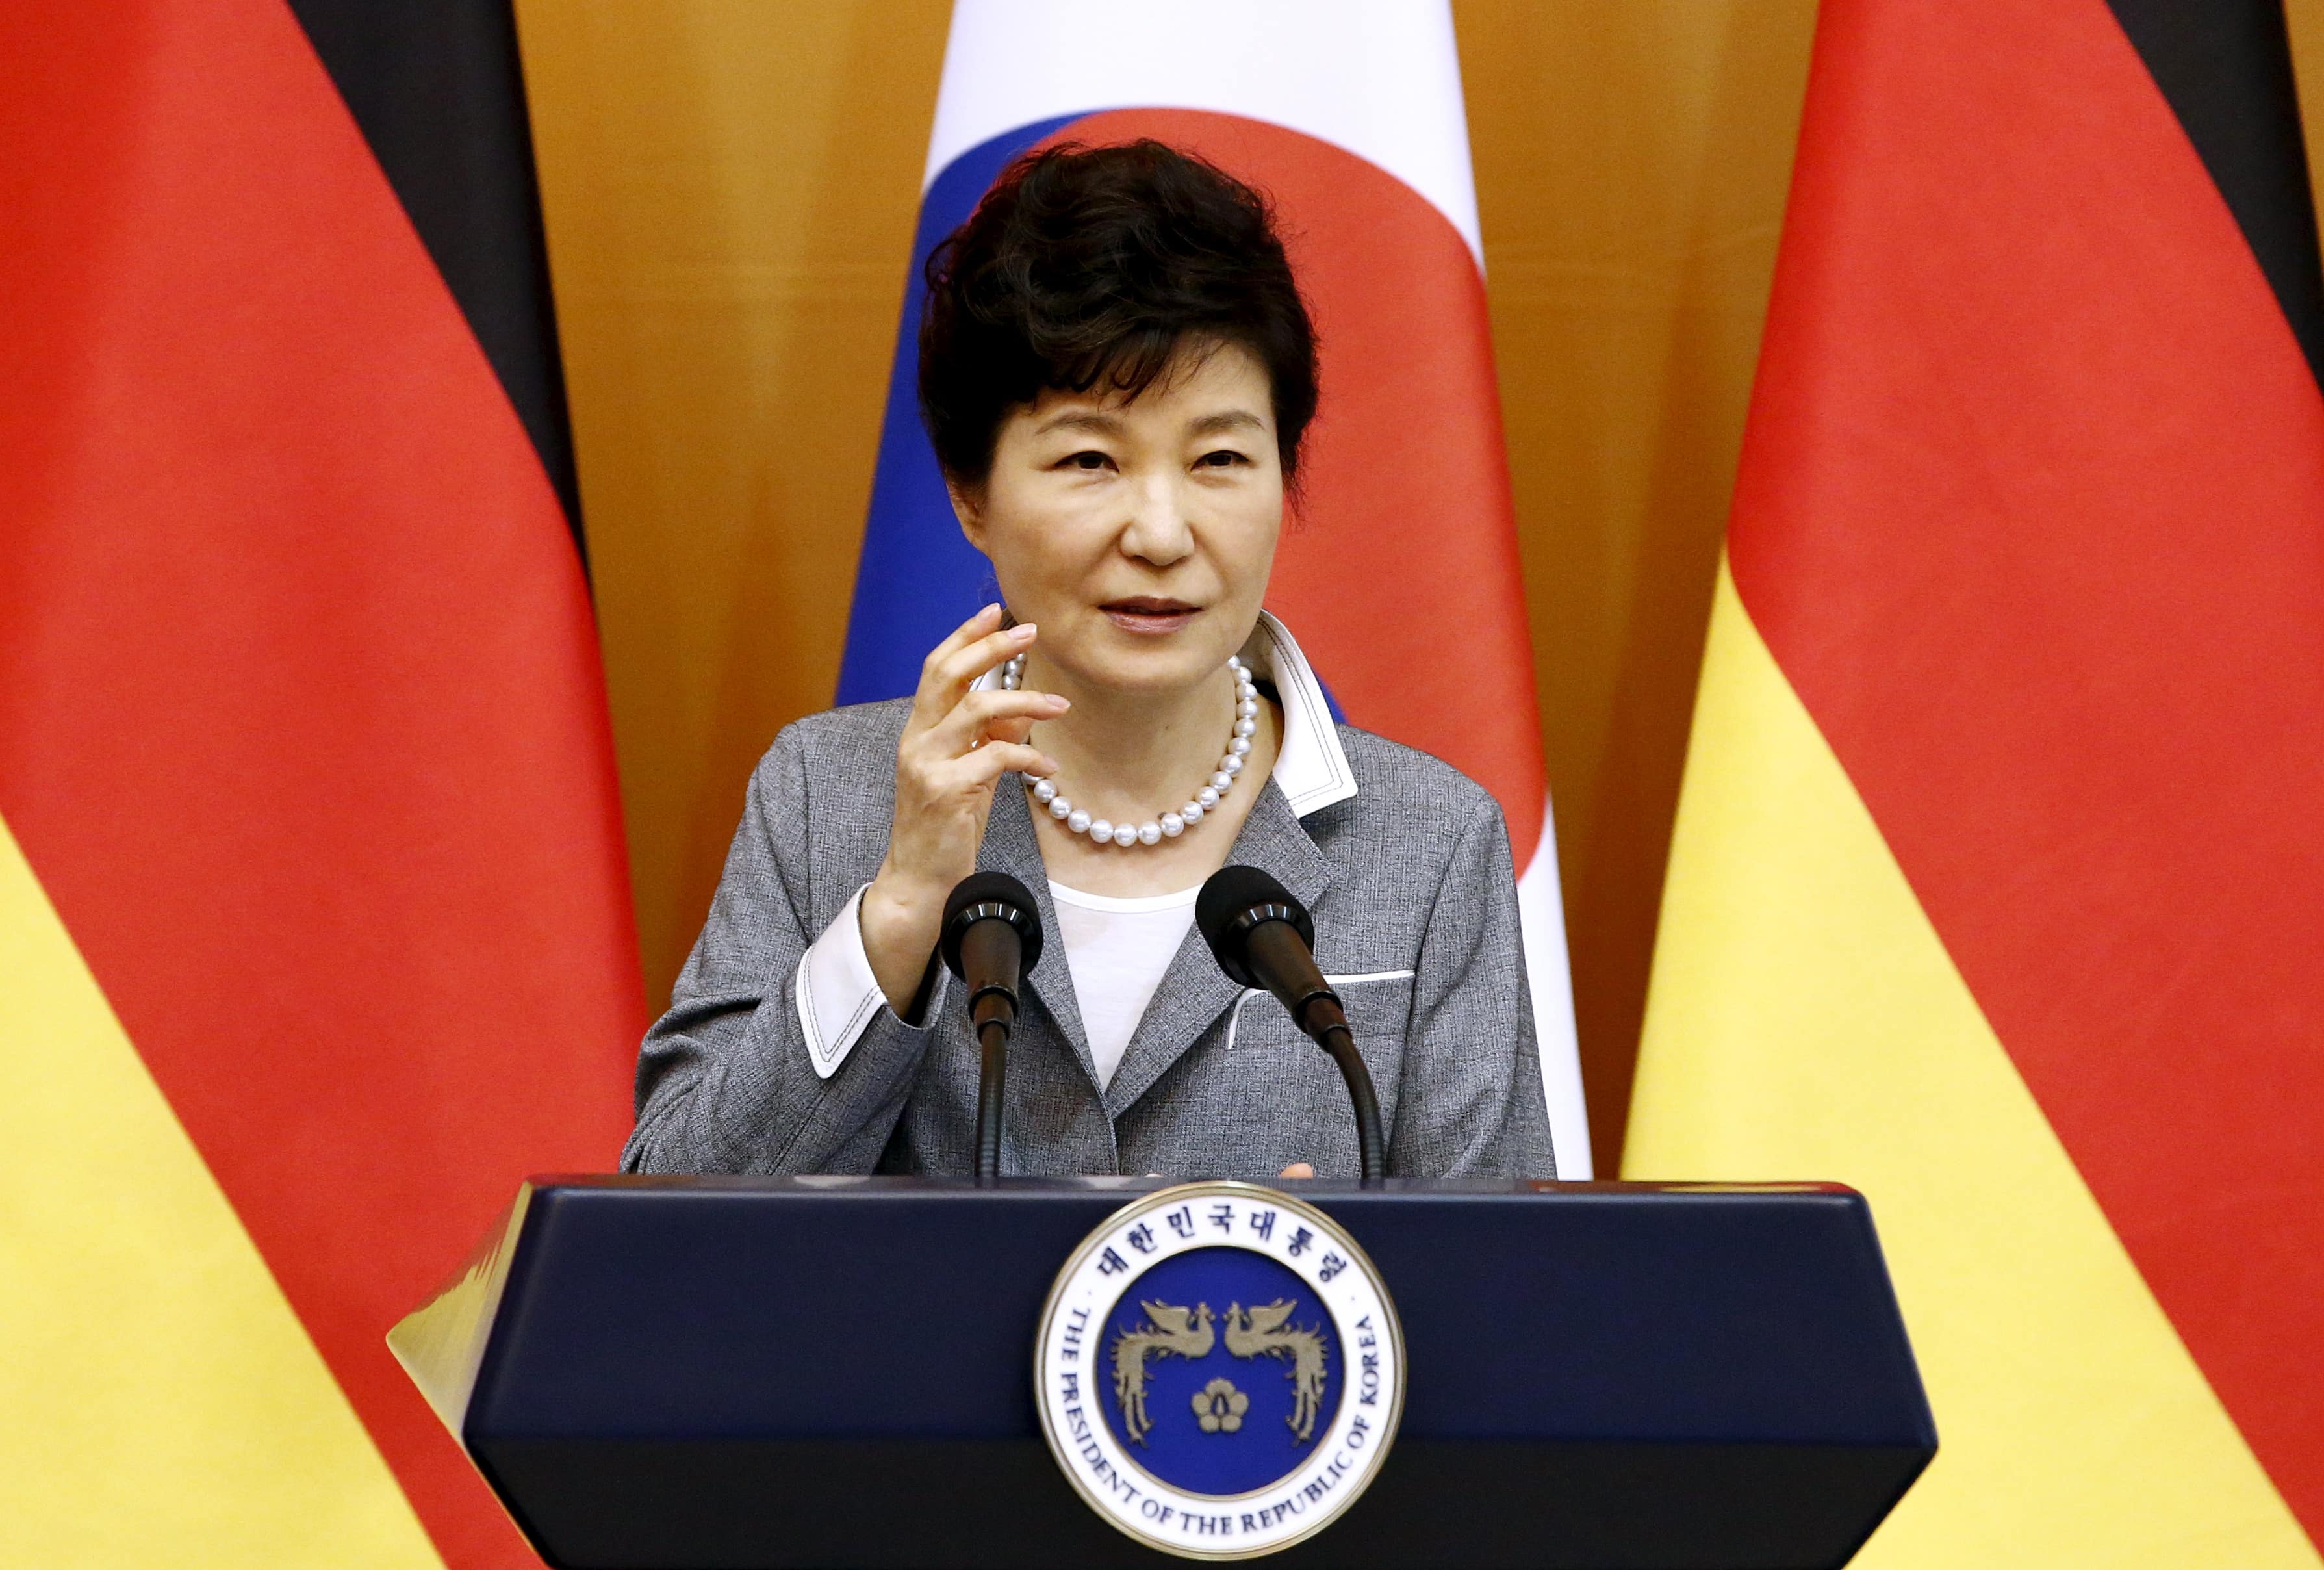 South Korean President Park Geun-Hye speaks during a joint news conference with German President Joachim Gauck (unseen) after their meeting at the presidential house in Seoul, South Korea, 12 October 2015, REUTERS/Jeon Heon-Kyun/Pool